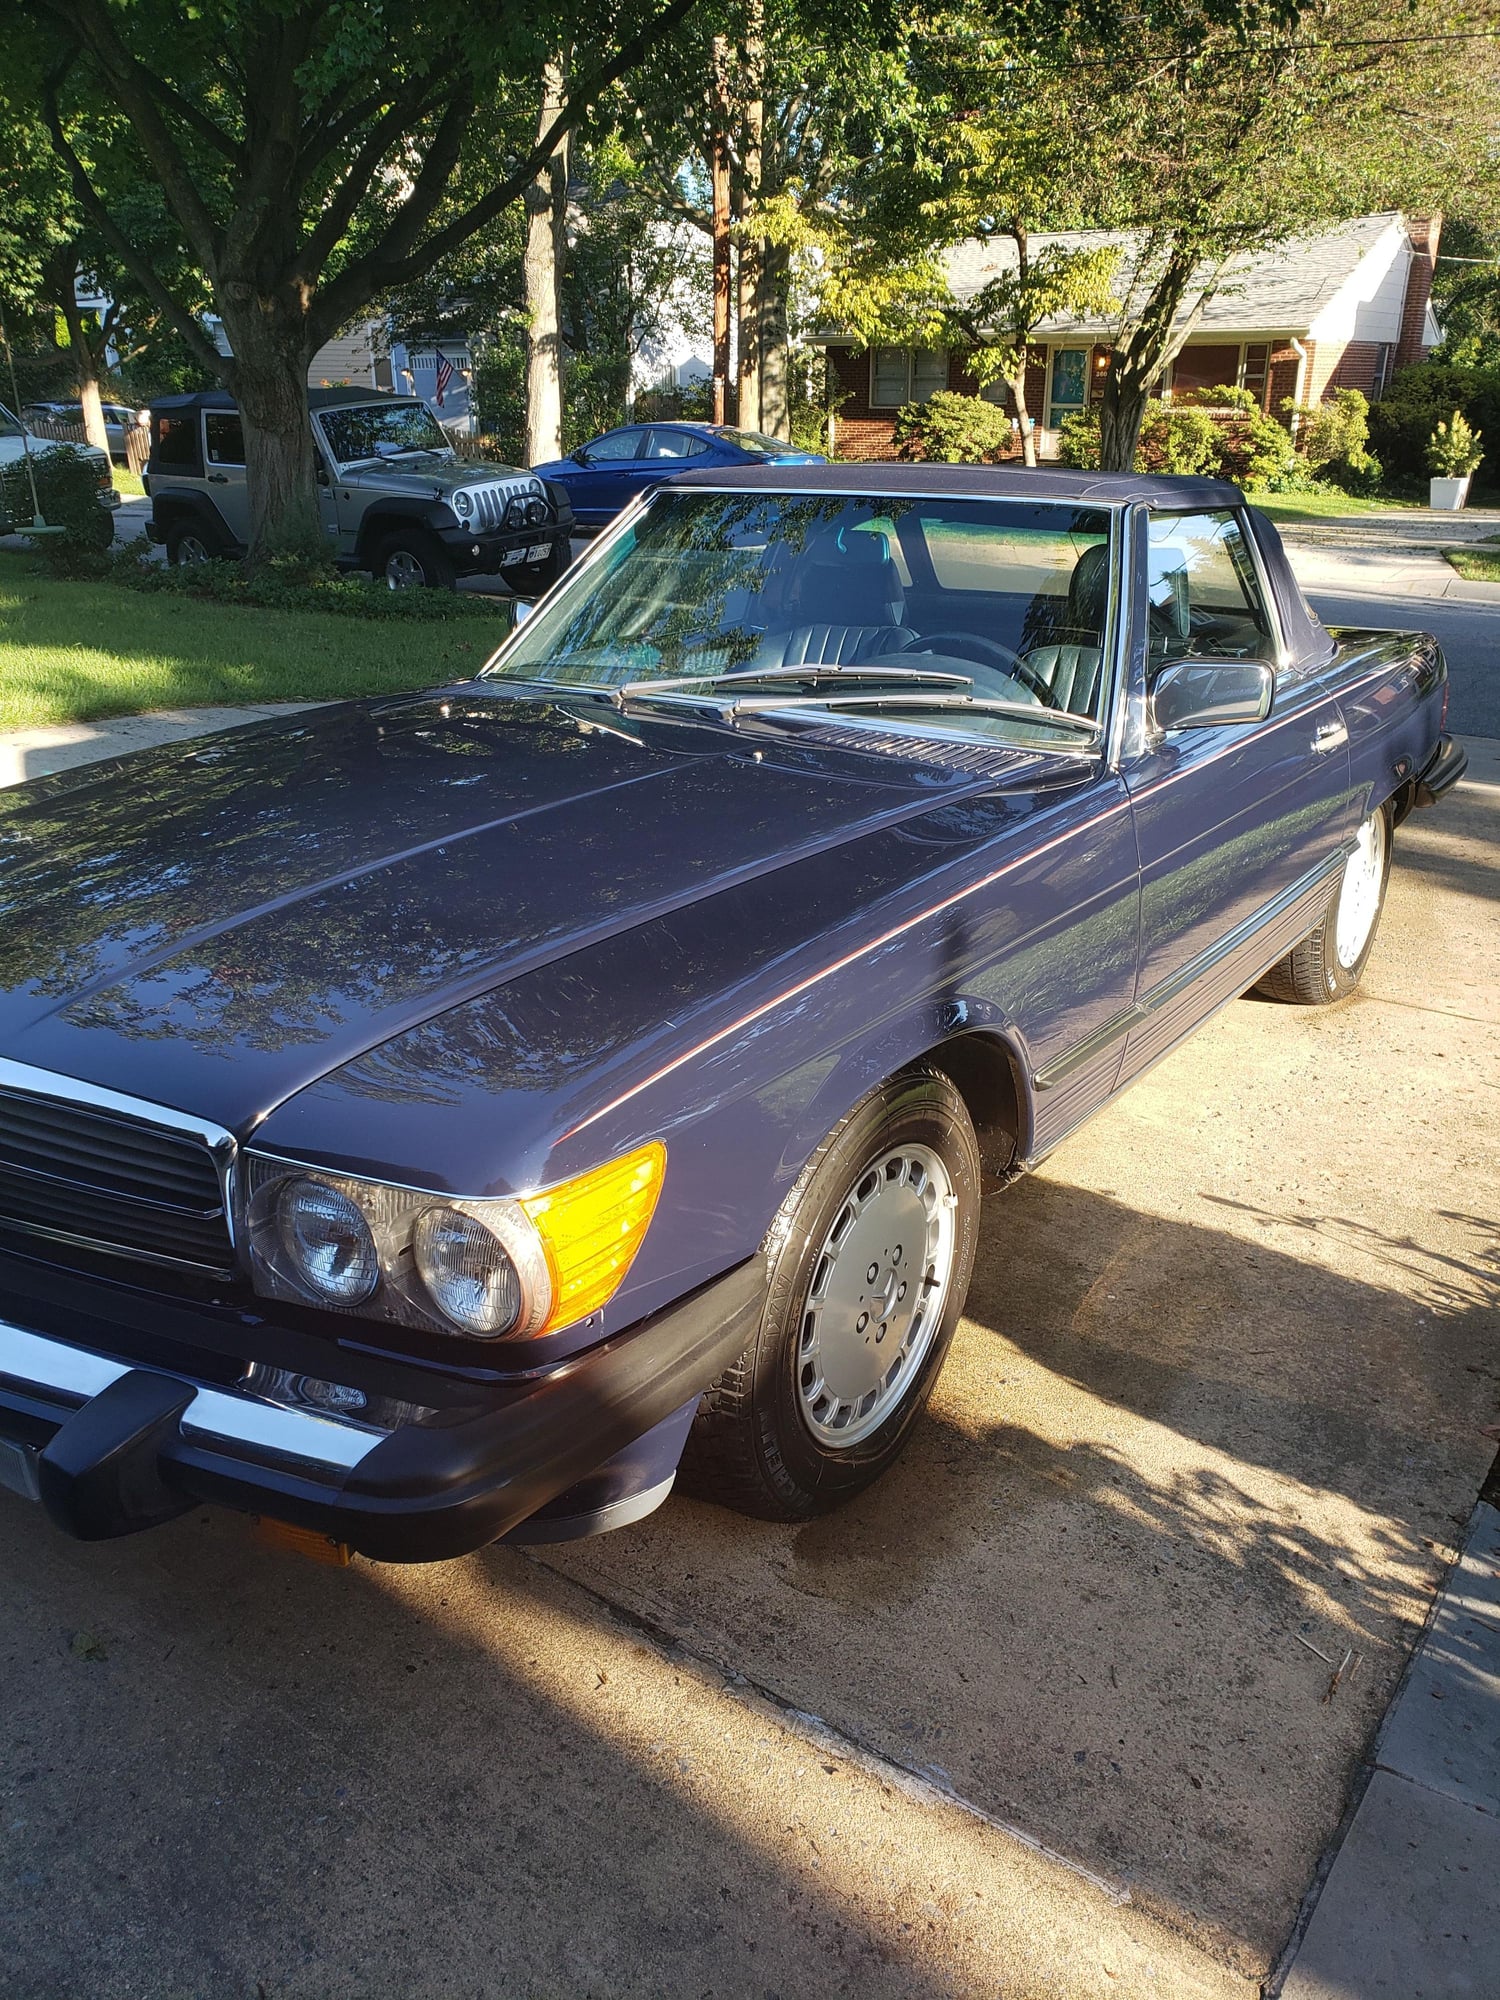 1986 Mercedes-Benz 560SL - Low Mileage 1986 560SL - Used - VIN WDBBA48D6GA044849 - 69,757 Miles - 8 cyl - Automatic - Bethesda, MD 20814, United States